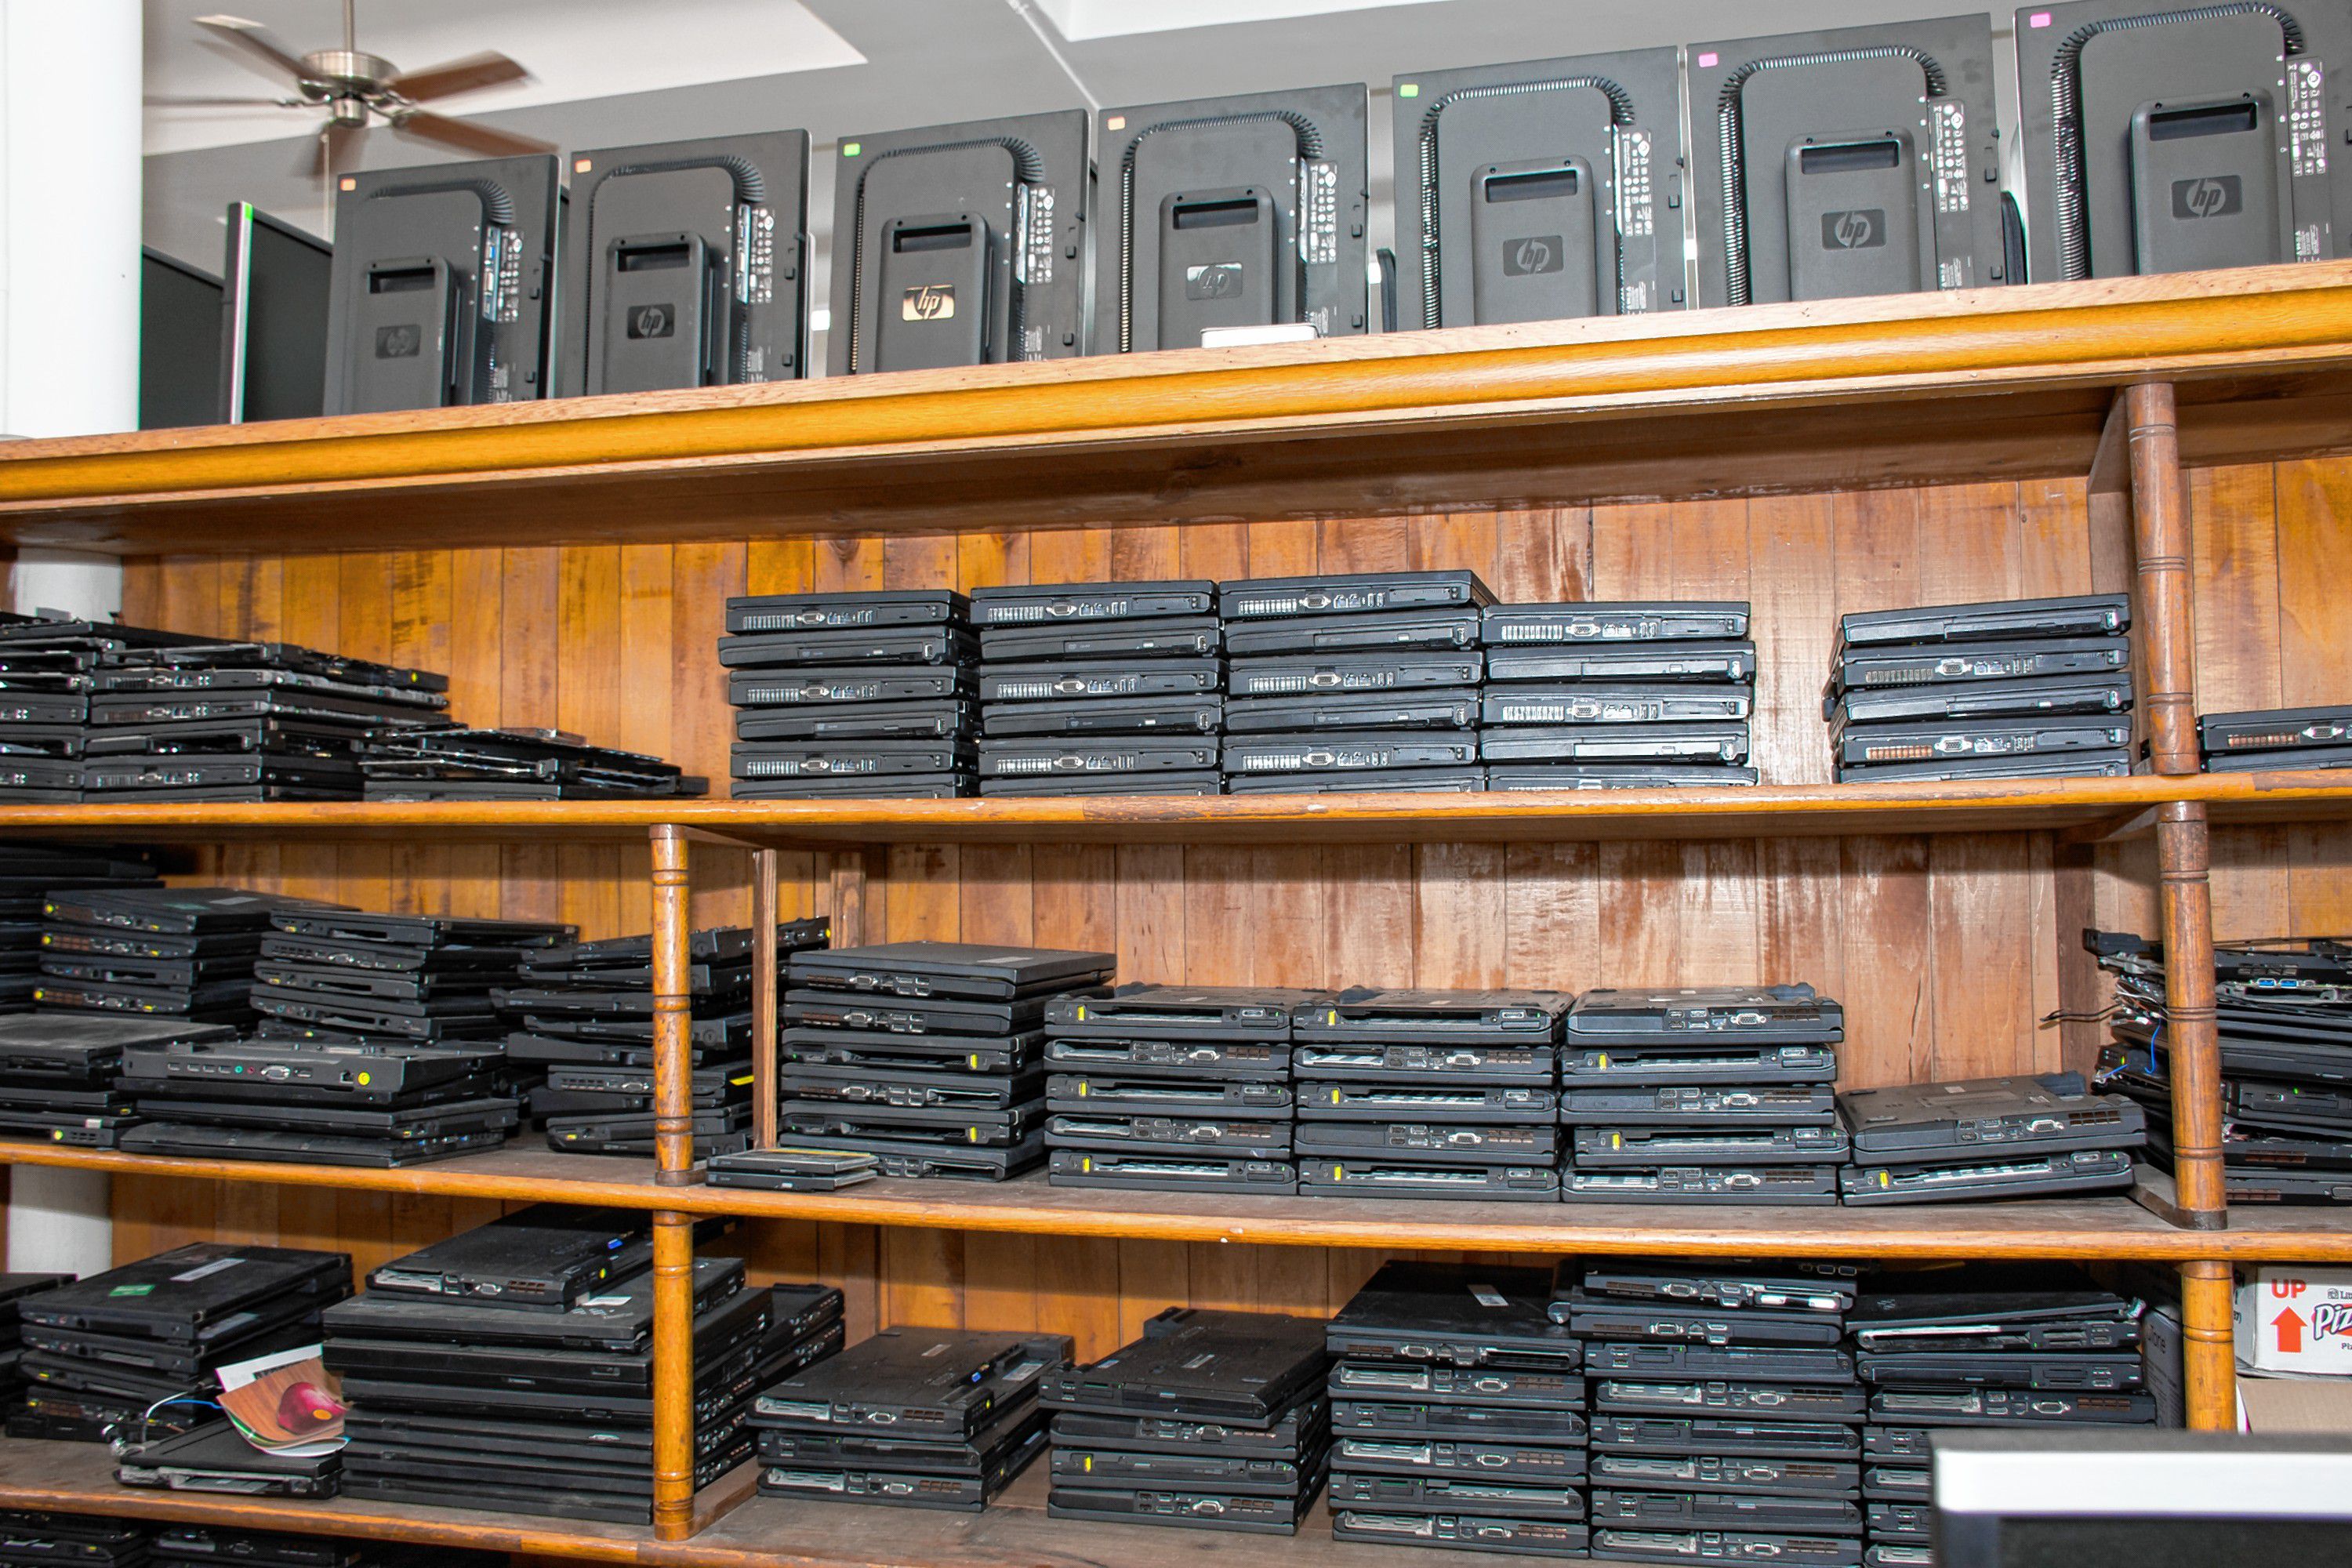 The shelves are stocked with ThinkPads. Nancy Nutile-McMenemy photograph